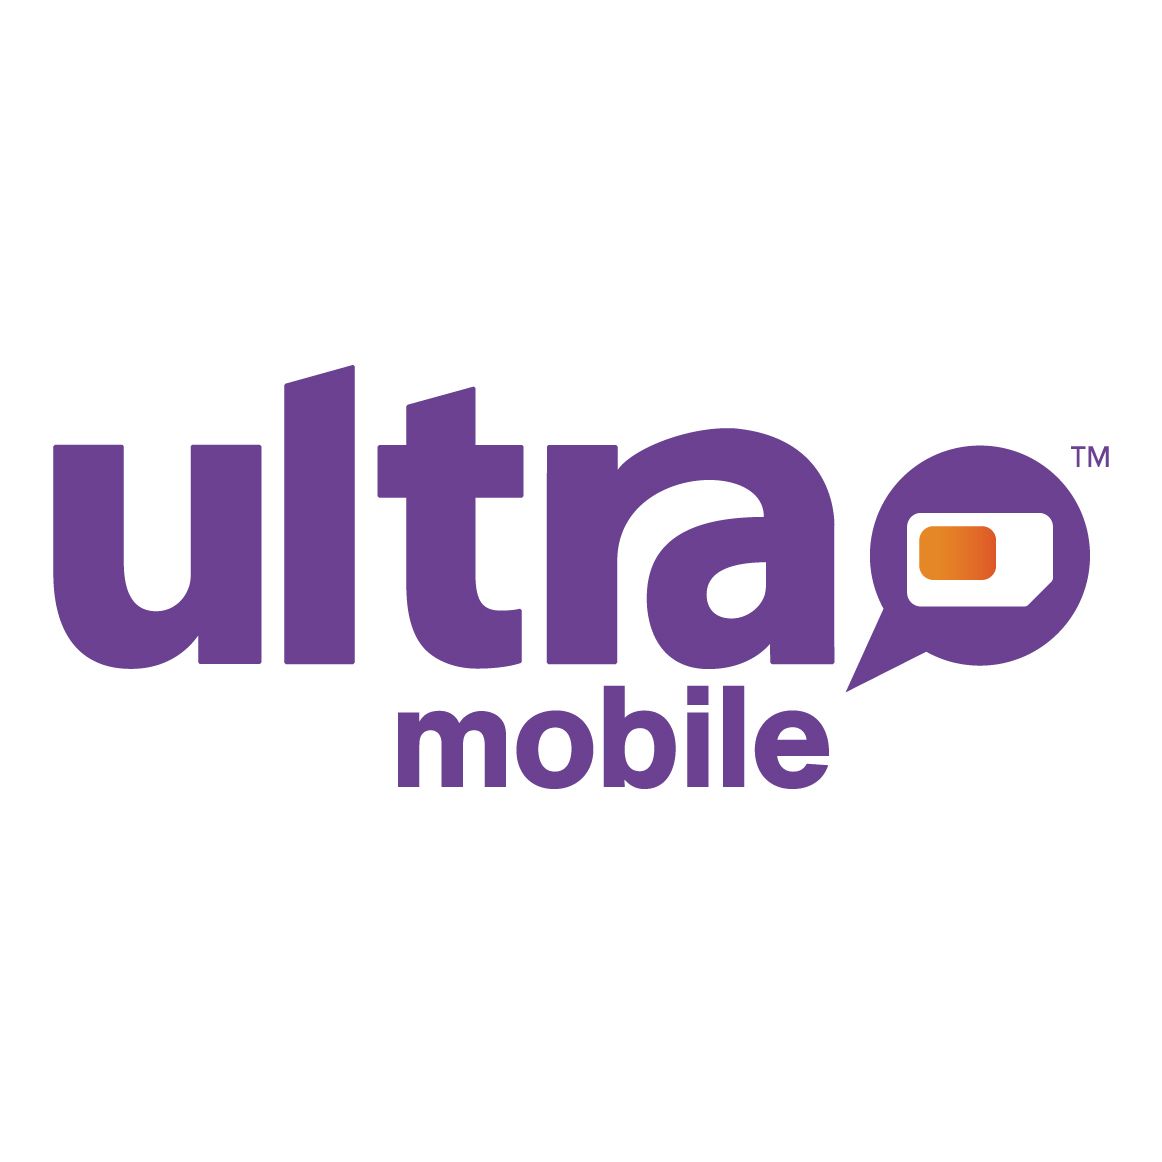 Ultra Mobile logo on a white background